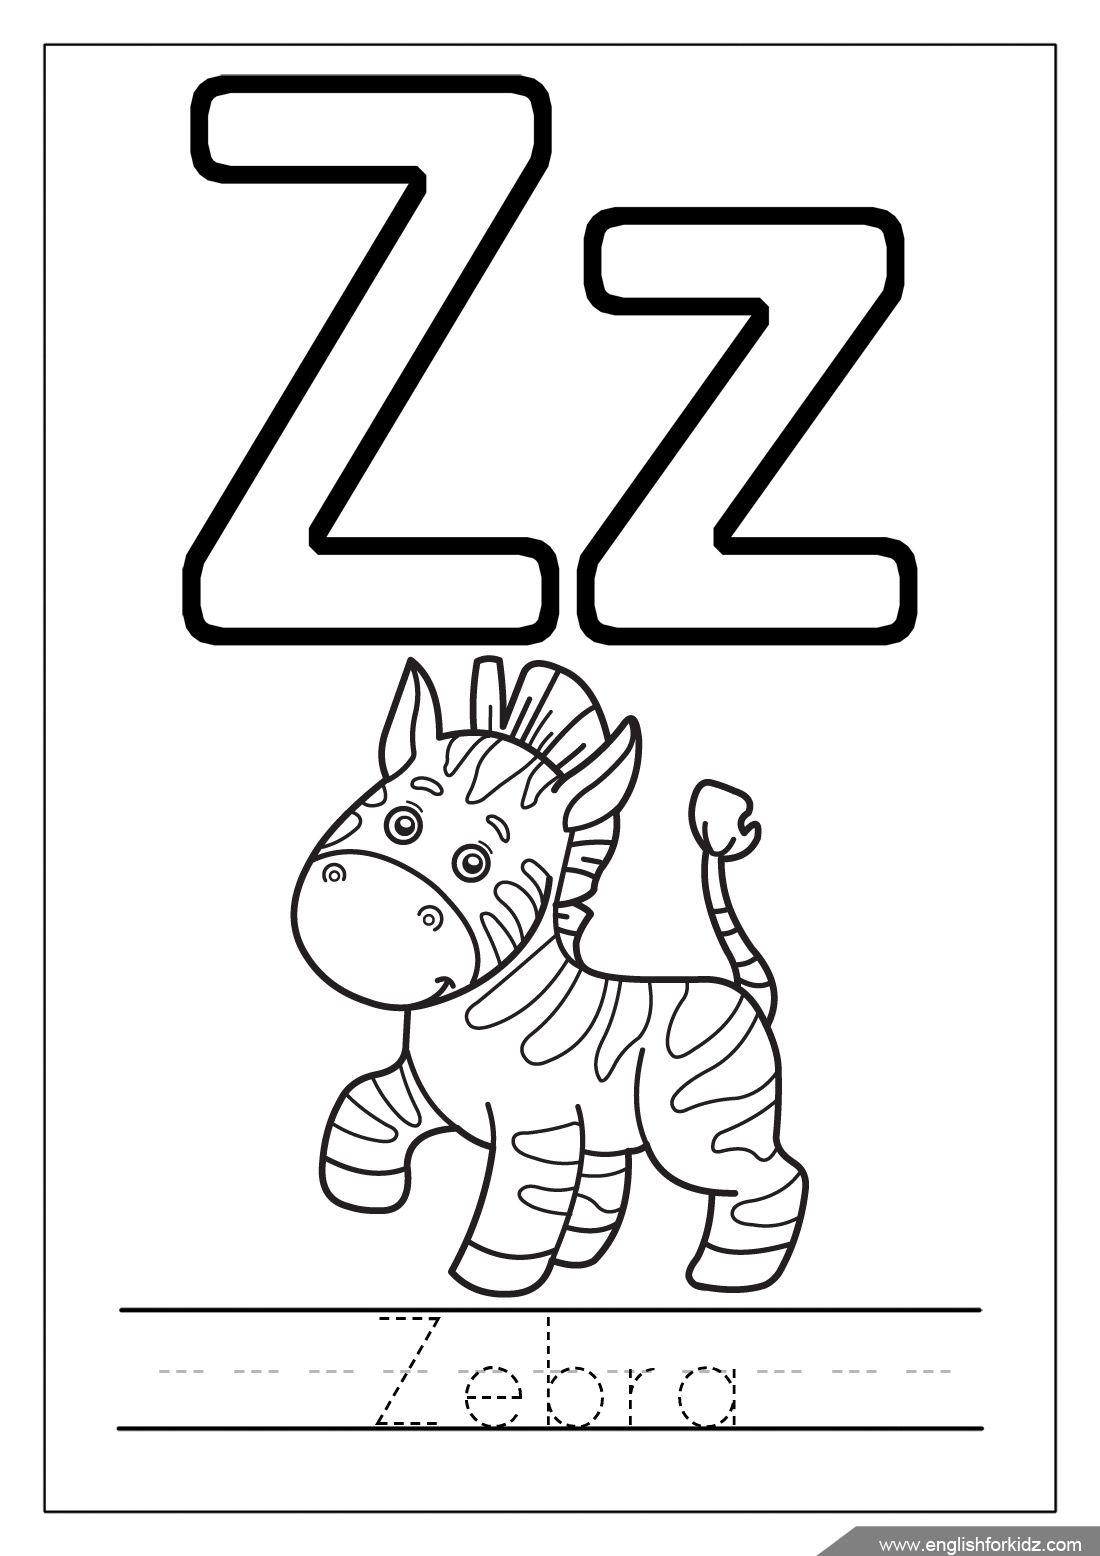 letter-z-coloring-page-at-getcolorings-free-printable-colorings-pages-to-print-and-color